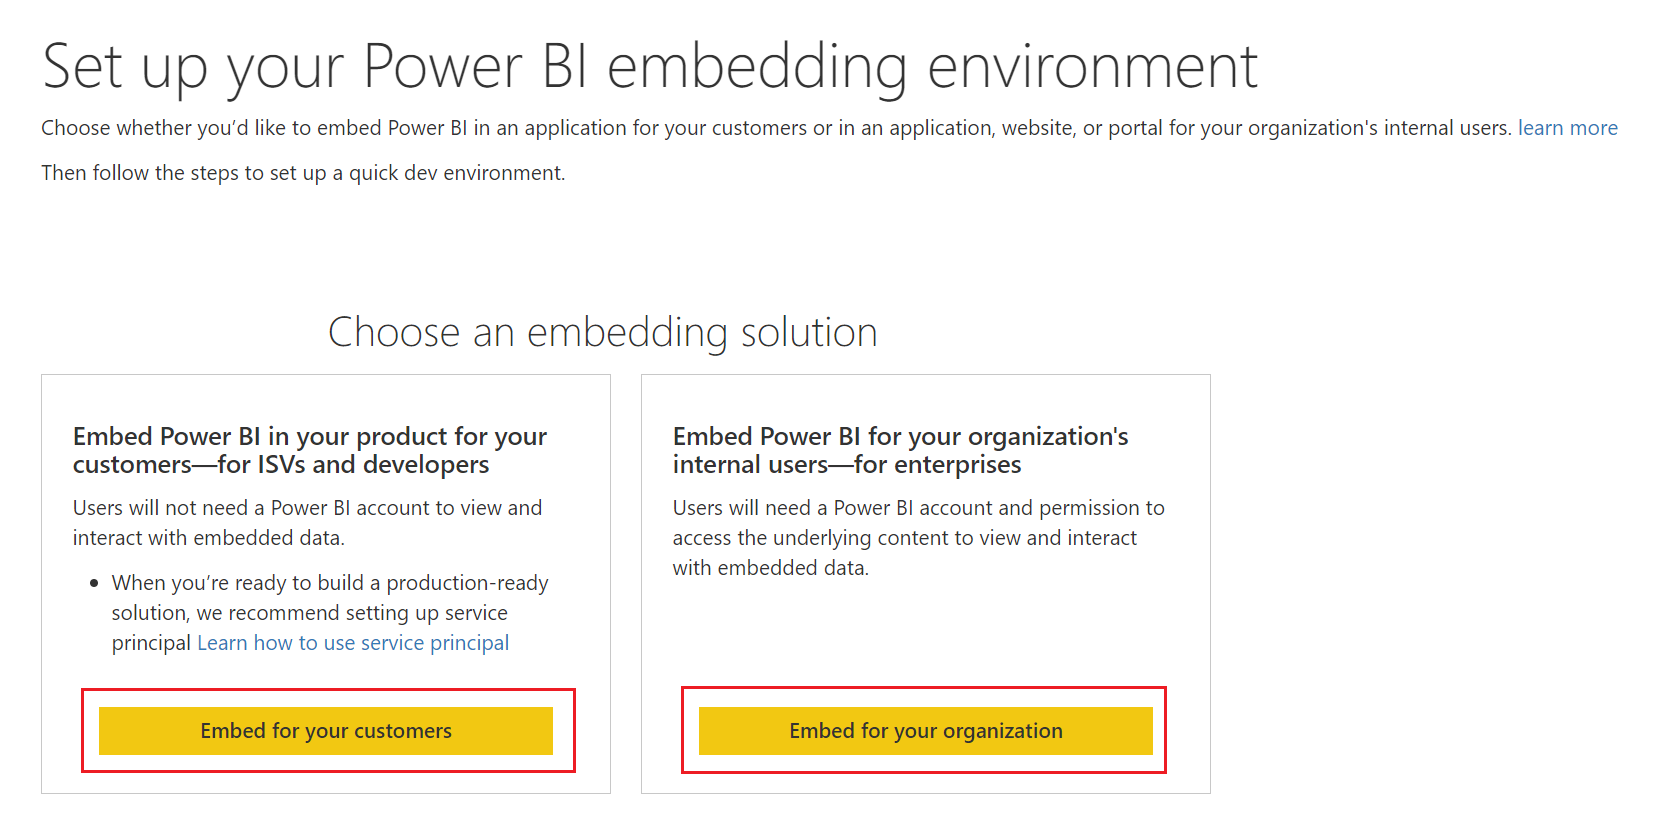 Screenshot of the first page of Setup your Power BI embedding environment. The options to embed for your customers or embed for your organization are shown.